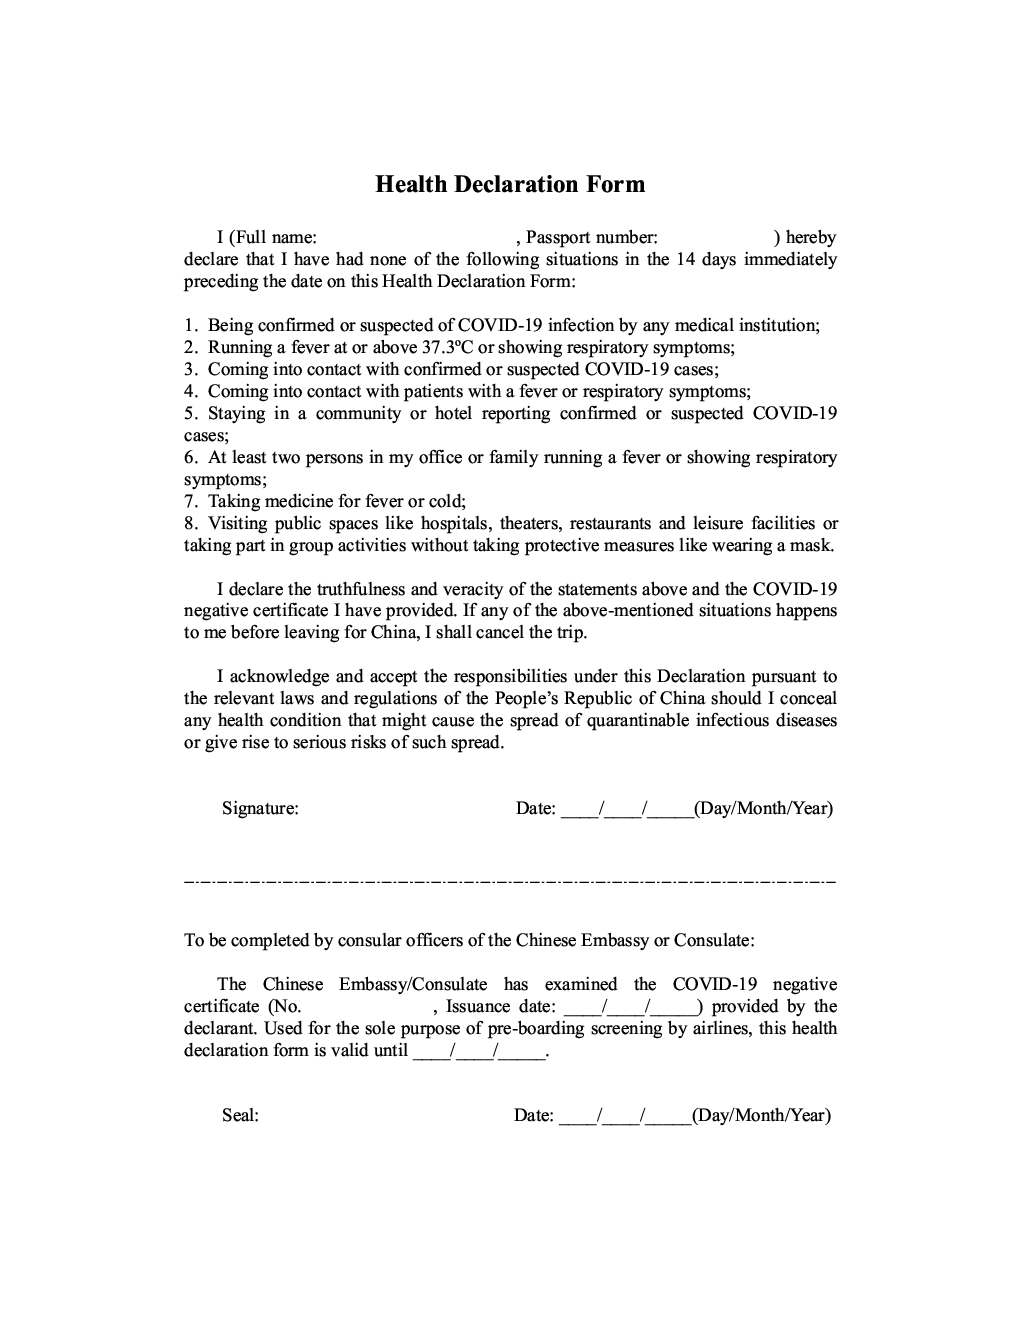 health declaration form for china travel